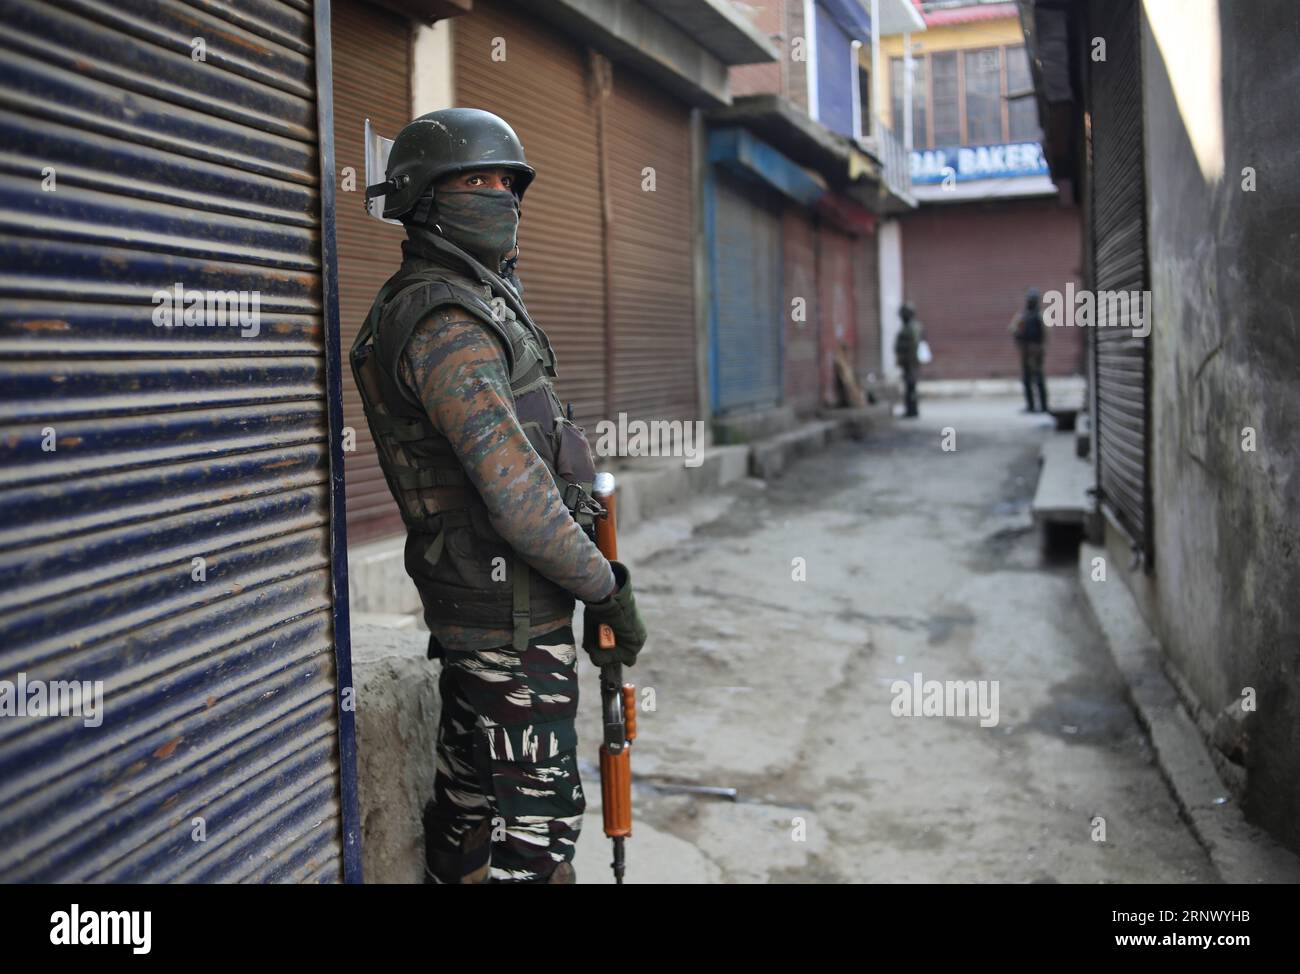 (180106) -- SOPORE, Jan. 6, 2018 -- Indian paramilitary troopers stand guard near the site of an improvised explosive device (IED) blast in Sopore town of Baramulla district, about 50 km northwest of Srinagar city, the summer capital of Indian-controlled Kashmir, on Jan. 6, 2018. At least four policemen were killed and two others wounded Saturday after militants triggered an improvised explosive device (IED) blast in restive Indian-controlled Kashmir, police said. ) (whw) INDIAN-CONTROLLED KASHMIR-SOPORE-BLAST JavedxDar PUBLICATIONxNOTxINxCHN Stock Photo